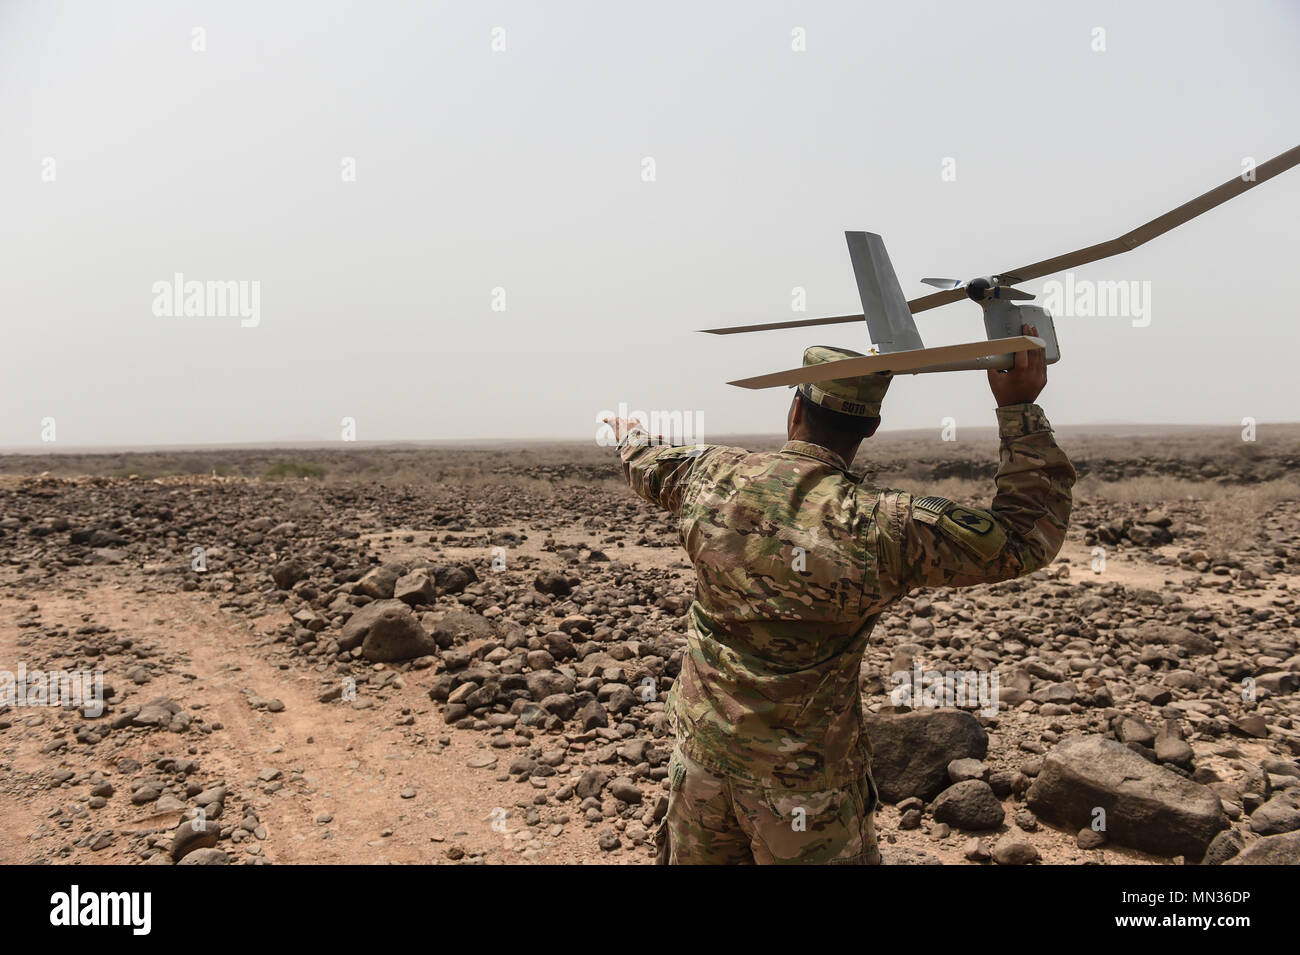 U.S. Army Spc. Enrique Soto, assigned to the 1st Battalion, 153rd Infantry Regiment, Task Force Warrior, an associated unit of Combined Joint Task Force - Horn of Africa, demonstrates a hand launch of a RQ-11 Raven remotely piloted aircraft in an airfield in southern Djibouti, Aug. 21, 2017. The demonstration was an effort to familiarize Djibouti Armed Forces members with the unmanned aerial vehicle system, clear up confusion about the Raven and other RPAs, and show the safe operation of the Raven. (U.S. Air Force photo by Staff Sgt. Eboni Prince) Stock Photo